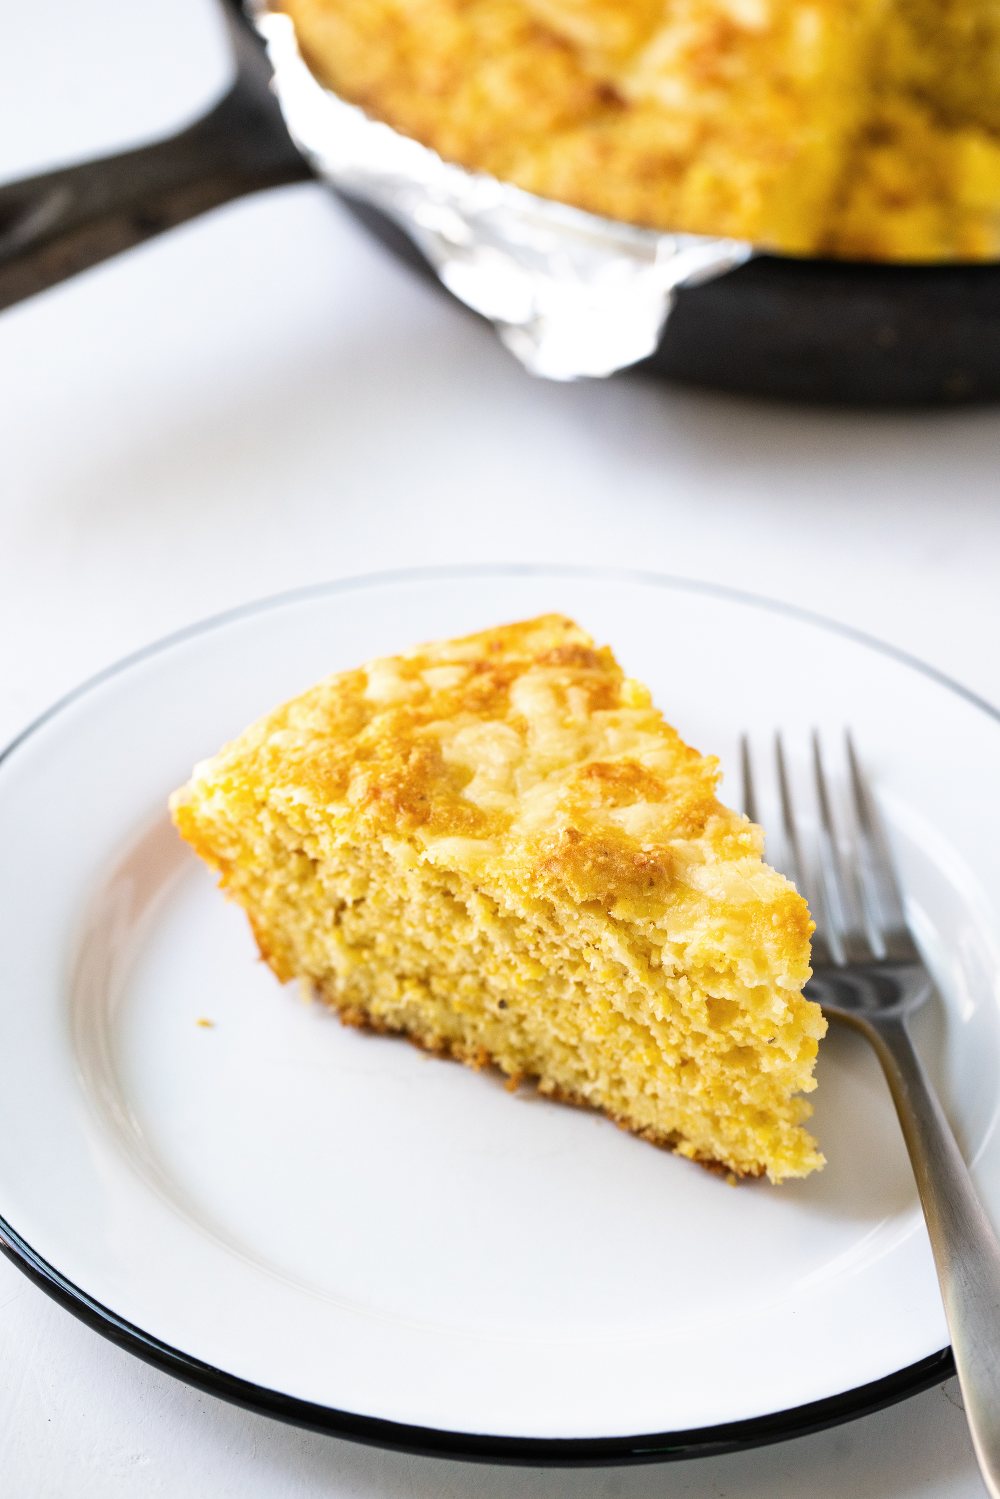 Cheesy Skillet Cornbread is ultra moist, tender, and loaded with cheddar cheese. It can be made in the oven or the grill, making it he perfect summer barbecue recipe!